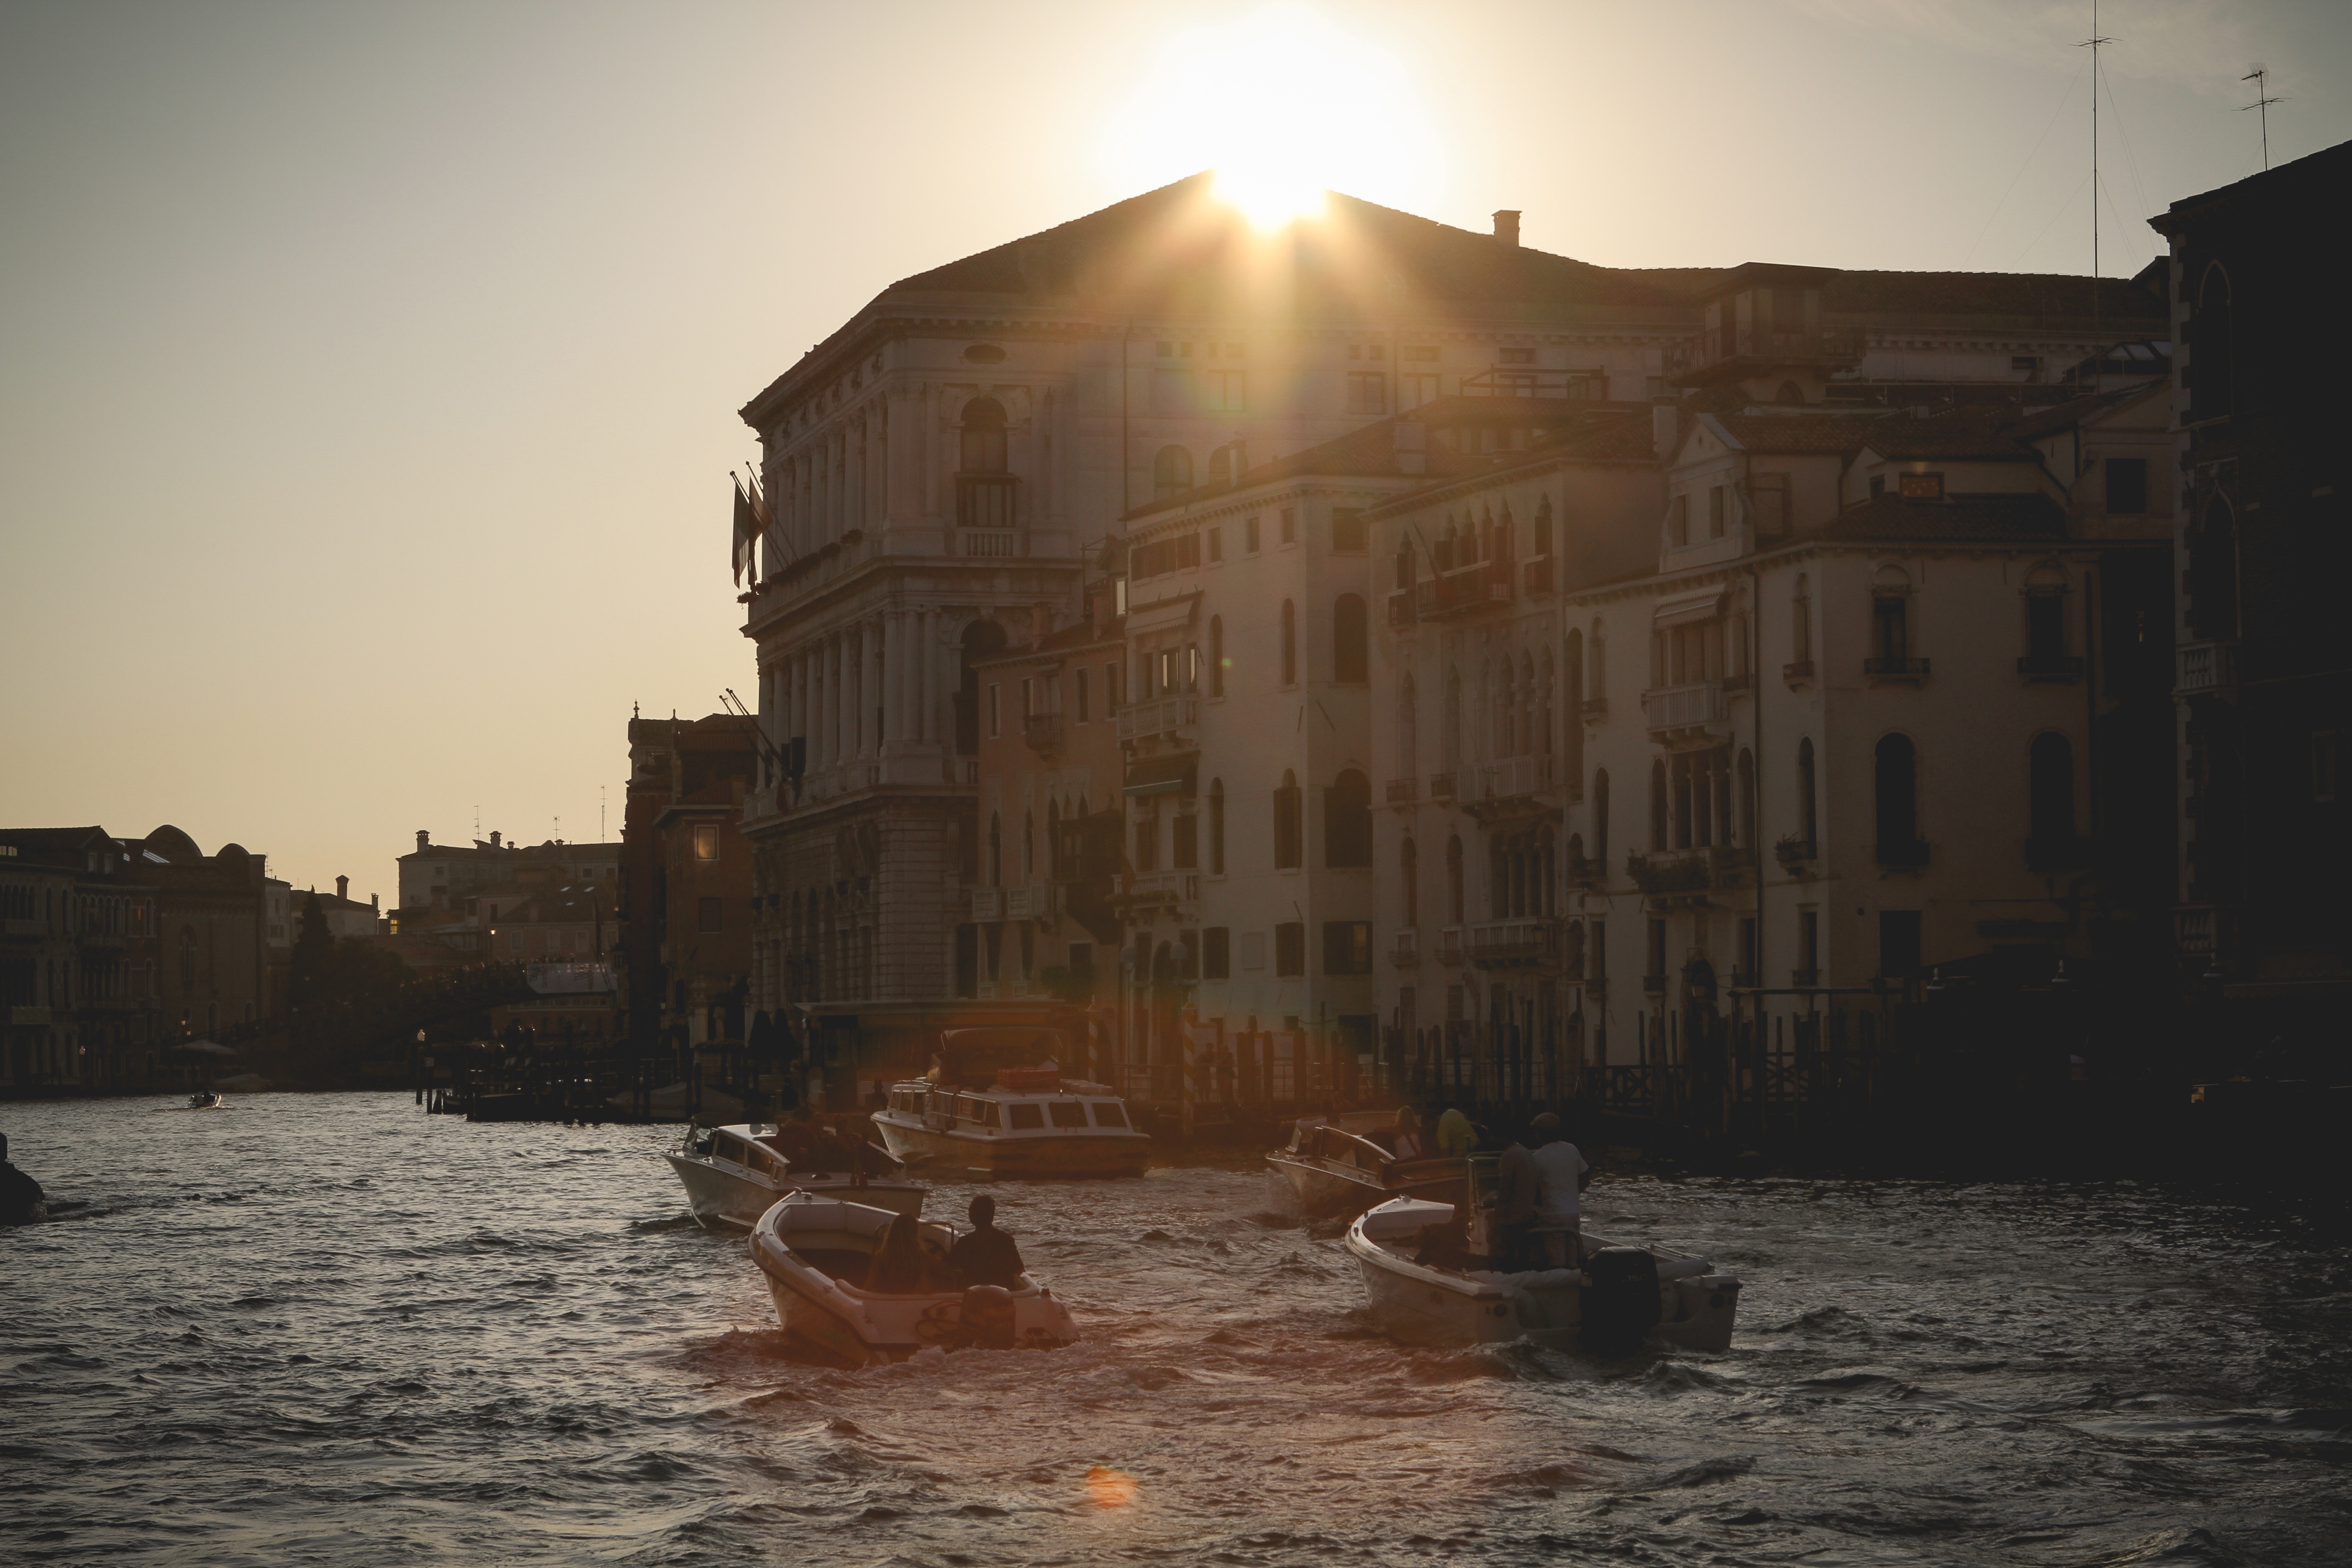 group of person riding on speed boats near city during sunse